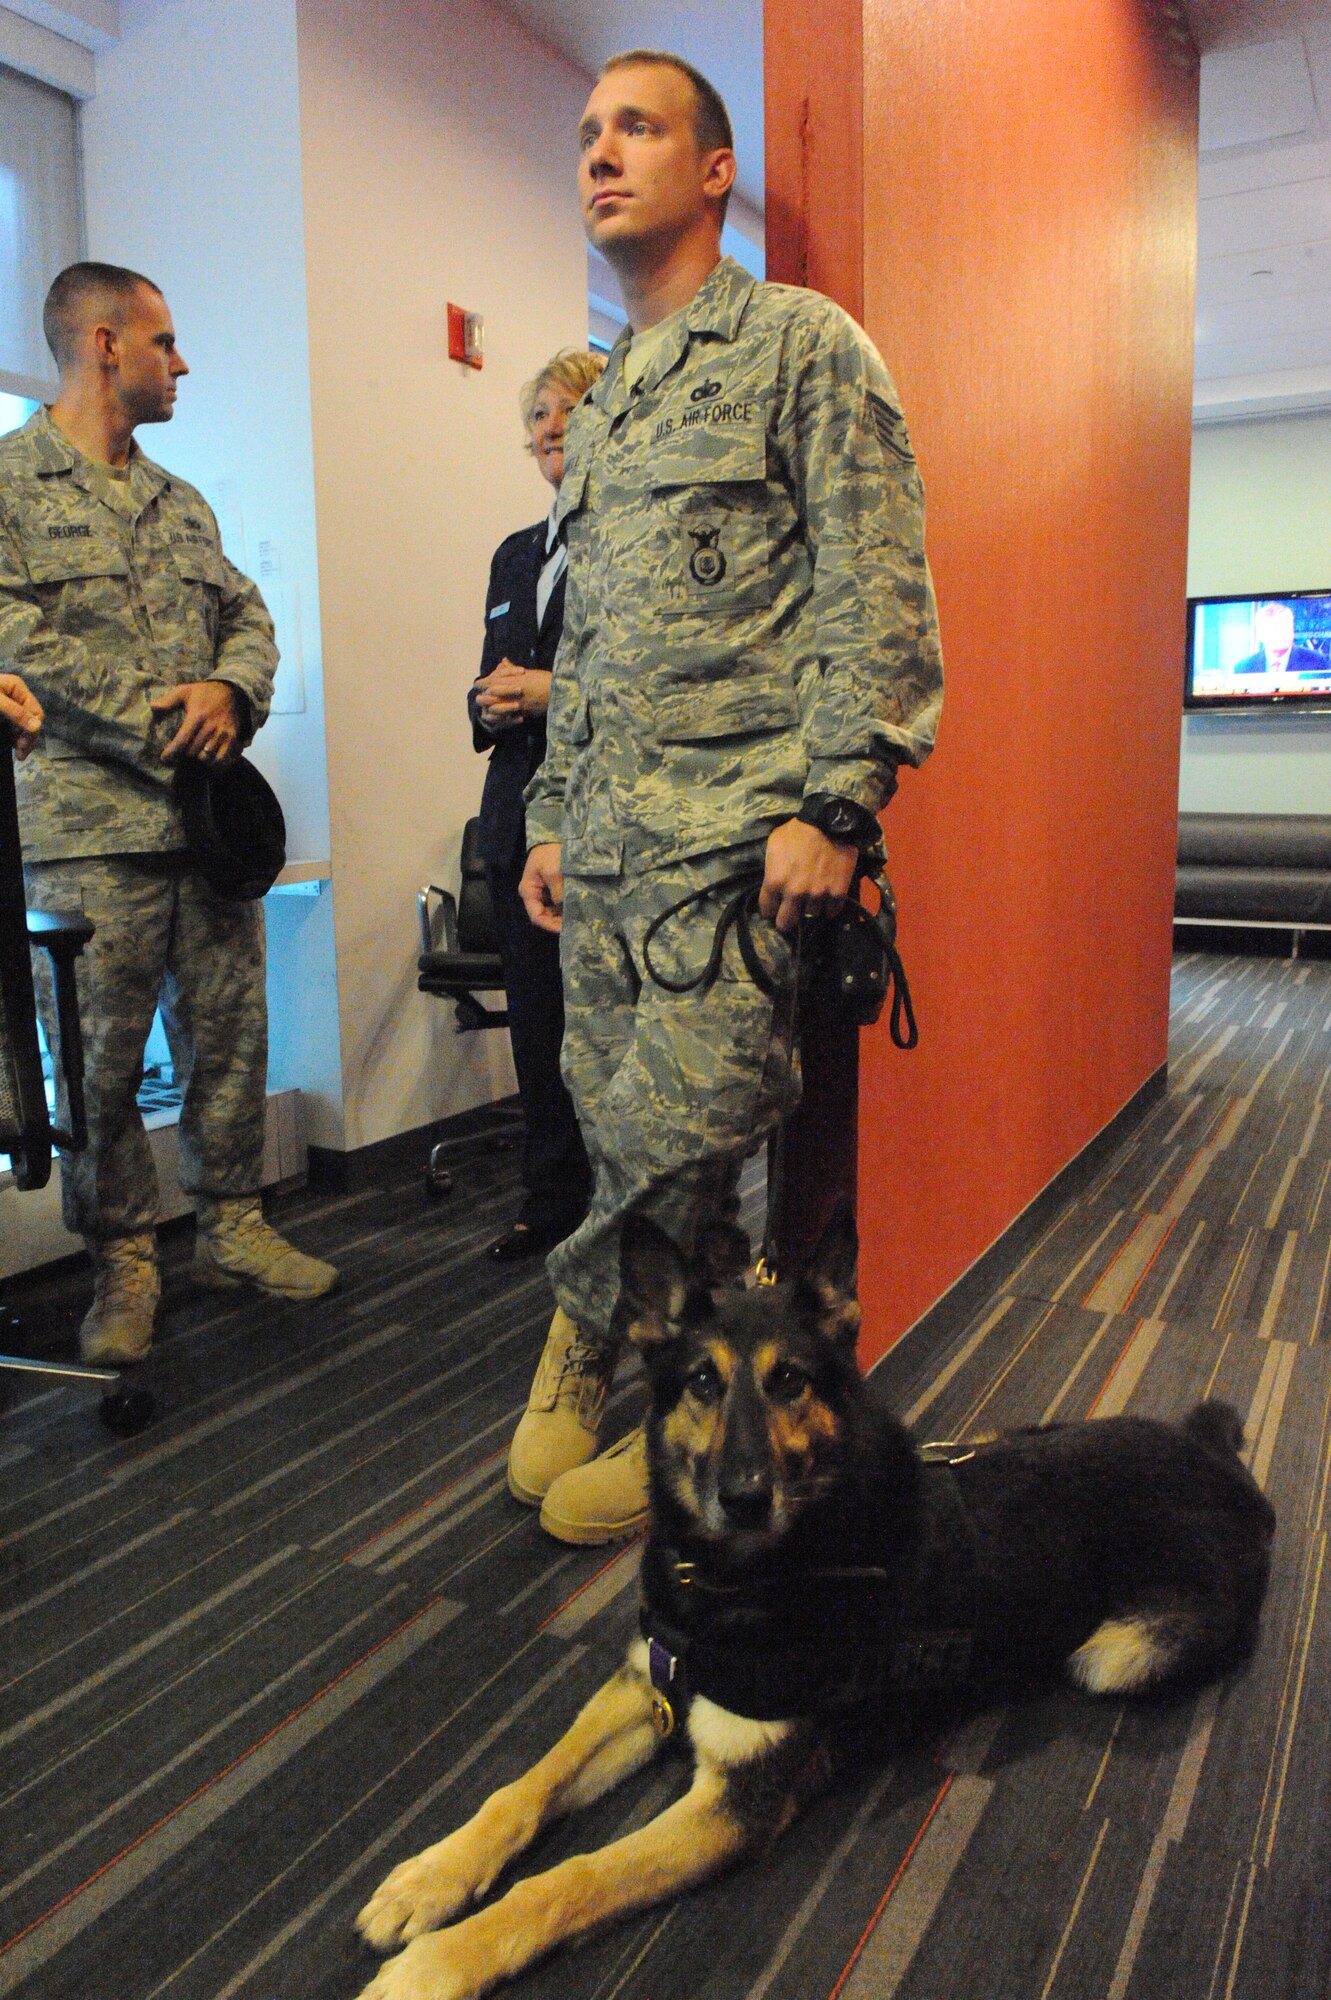 Staff Sgt. Benjamin Seekell watches the television monitors in the green room of the FOX and Friends studio in New York Sept. 12, 2011.  Seekell and his military working dog Charlie prepare to go on camera with other members of the 4th Security Forces Squadron from Seymour Johnson Air Force Base, N.C. to speak about the Security Forces 9/11 Ruck March to Remember.  Charlie wears the Purple Heart he was awarded after being injured by an improvised explosive device outside Bagram Airfield, Afghanistan on Mother’s Day 2011.  Charlie received shrapnel wounds to his hind quarters and damage to his eardrums and Seekell lost his left leg.  Seekell is a native of Charlestown, R.I. (U.S. Air Force photo by 2nd Lieutenant Keavy Rake)